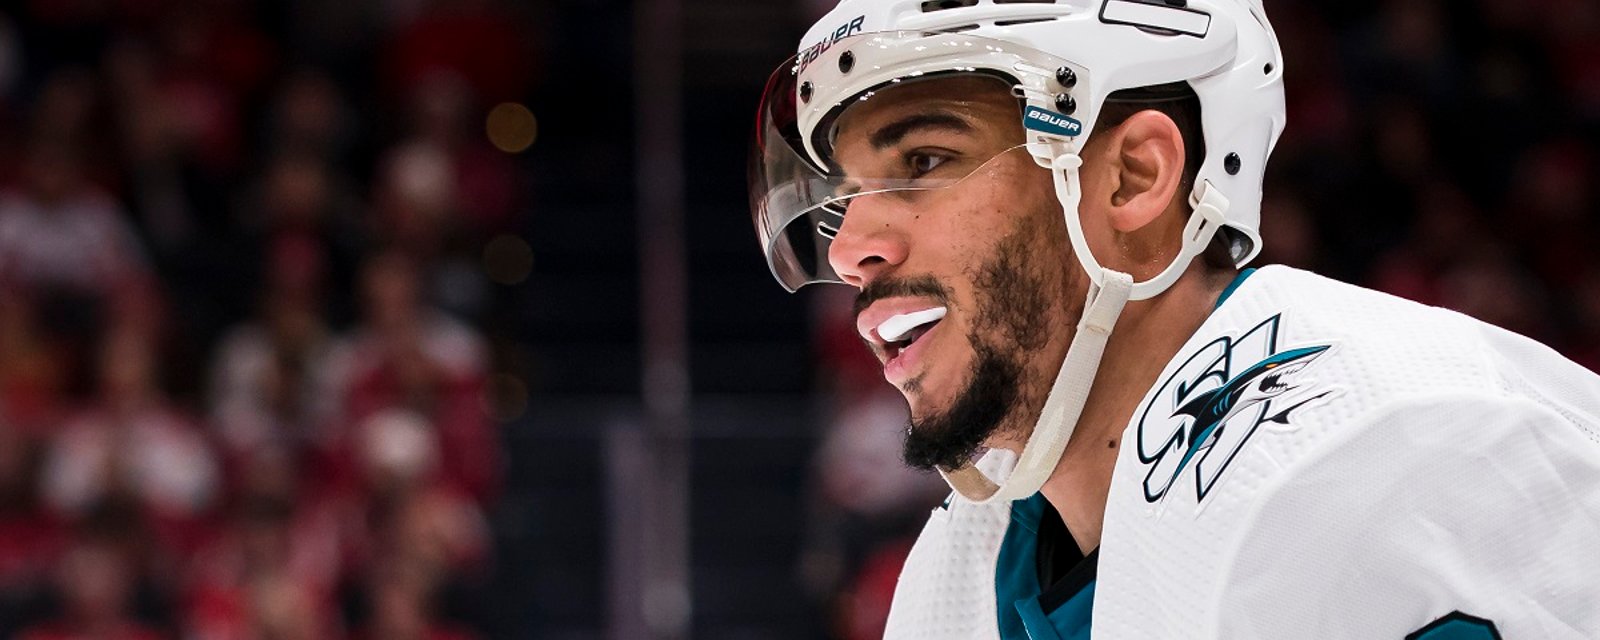 Evander Kane slams NHL Player Safety after being hit with a 3 game suspension.